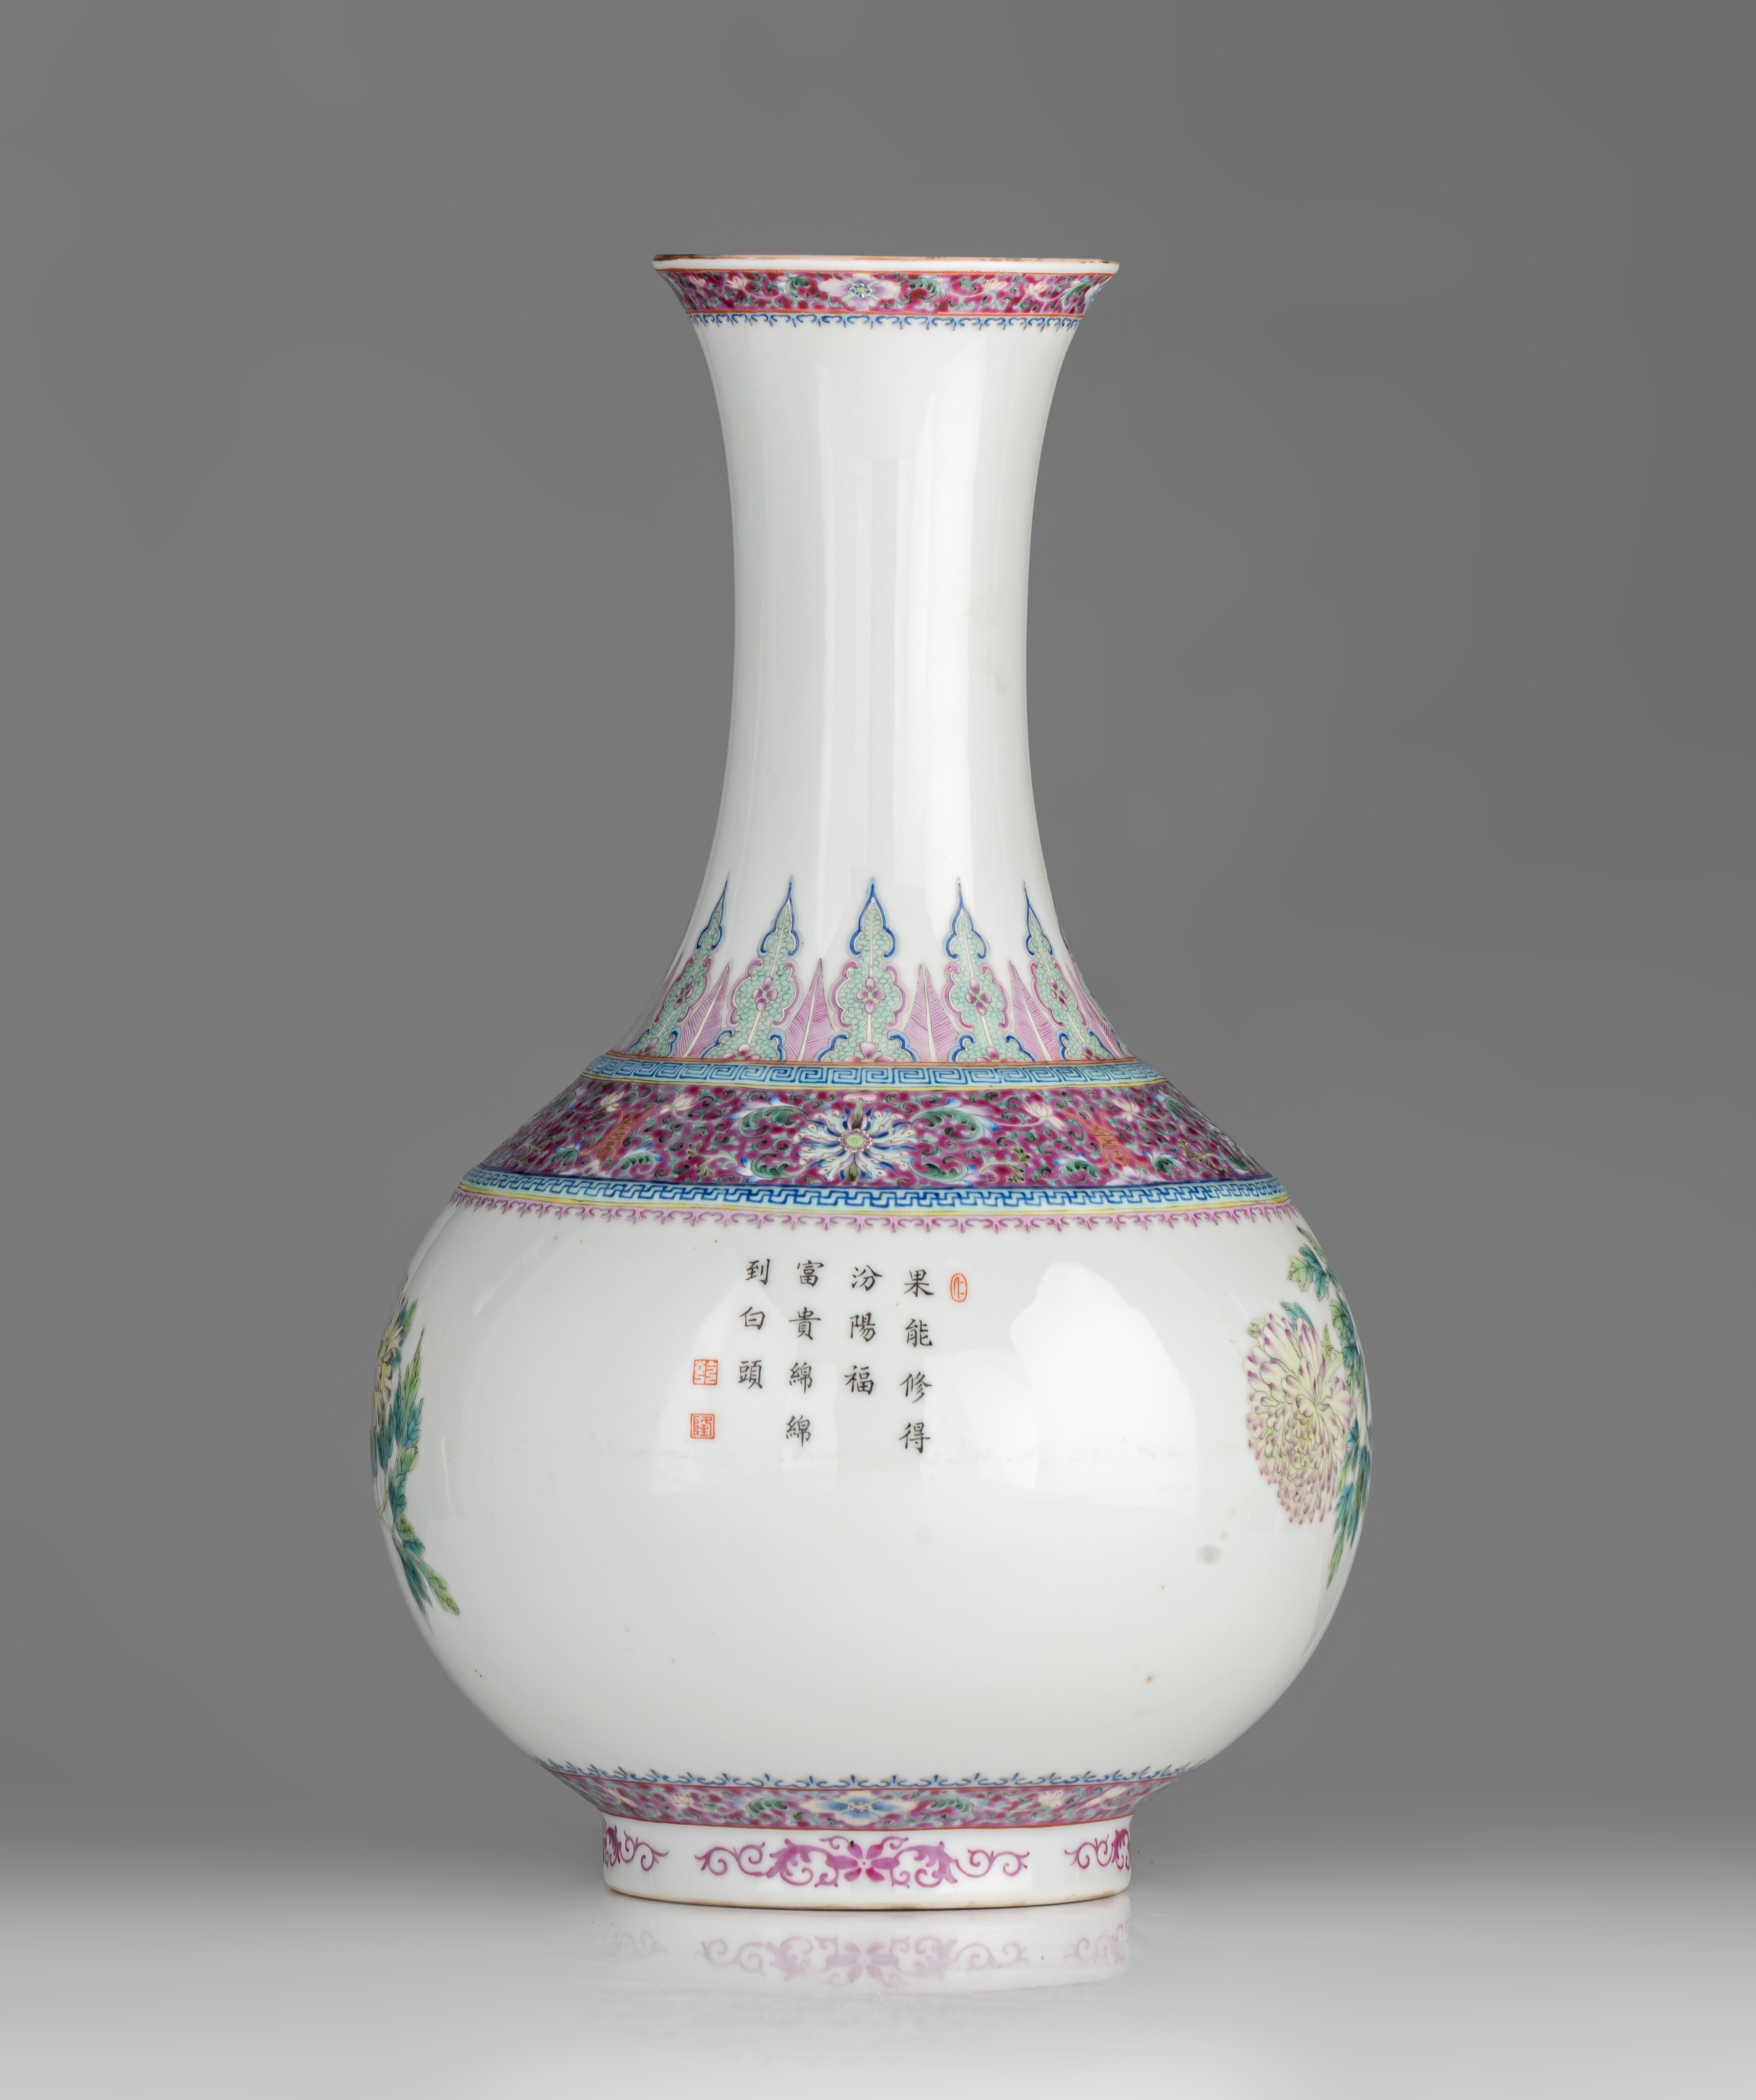 A fine Chinese famille rose 'Birds and Flowers' bottle vase, with a Qianlong mark, Republic period, - Image 5 of 9